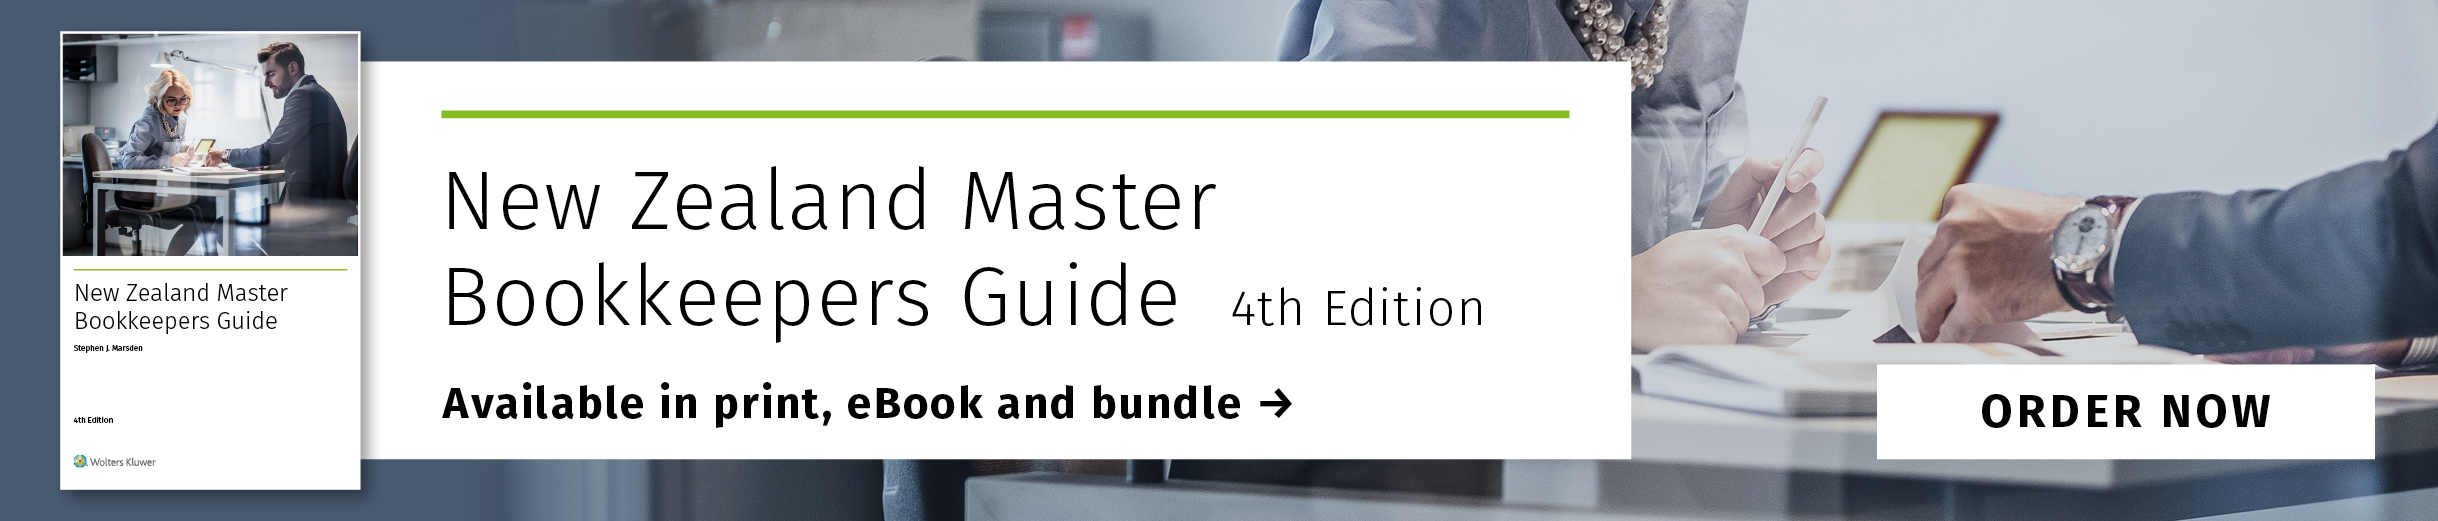 New Zealand Master Bookkeepers Guide 4th Edition